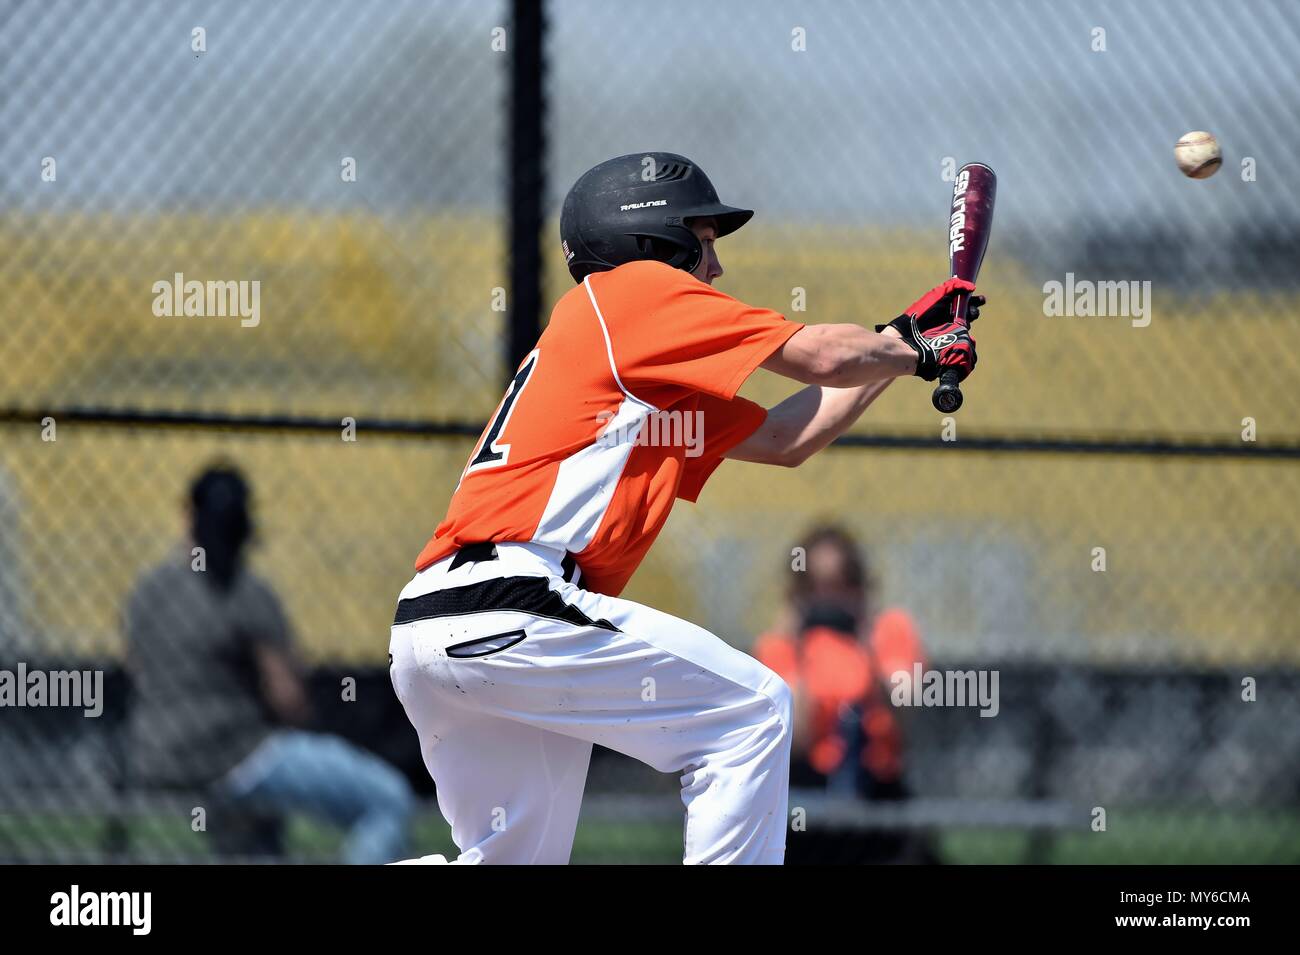 Hitter putting down a successful bunt. USA. Stock Photo